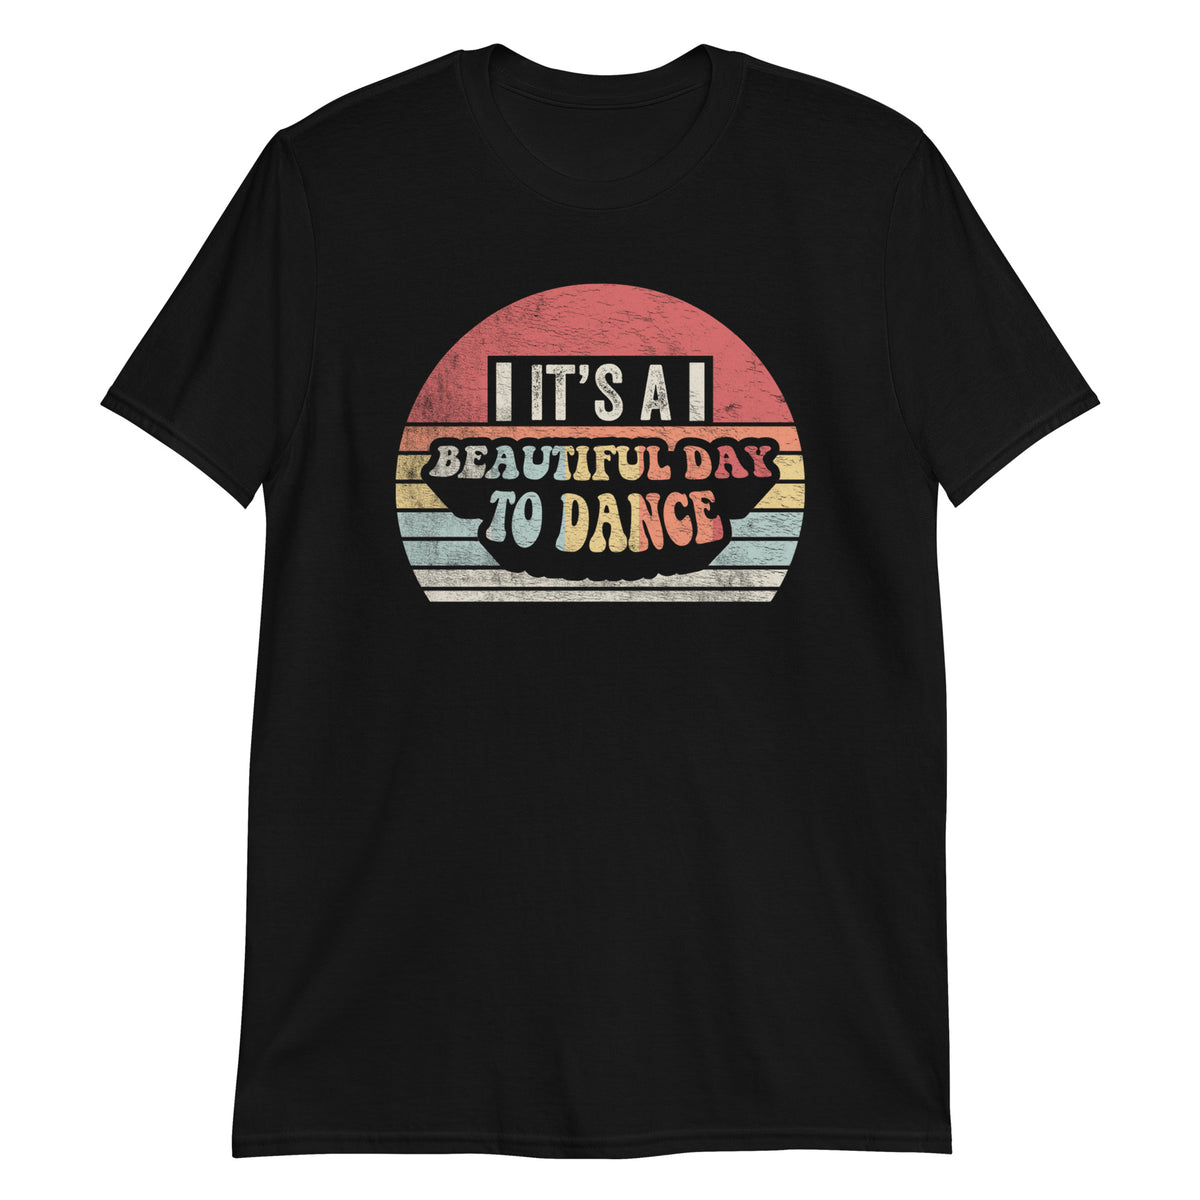 It's A Beautiful Day To Dance Dancing Funny Retro Vintage T-Shirt